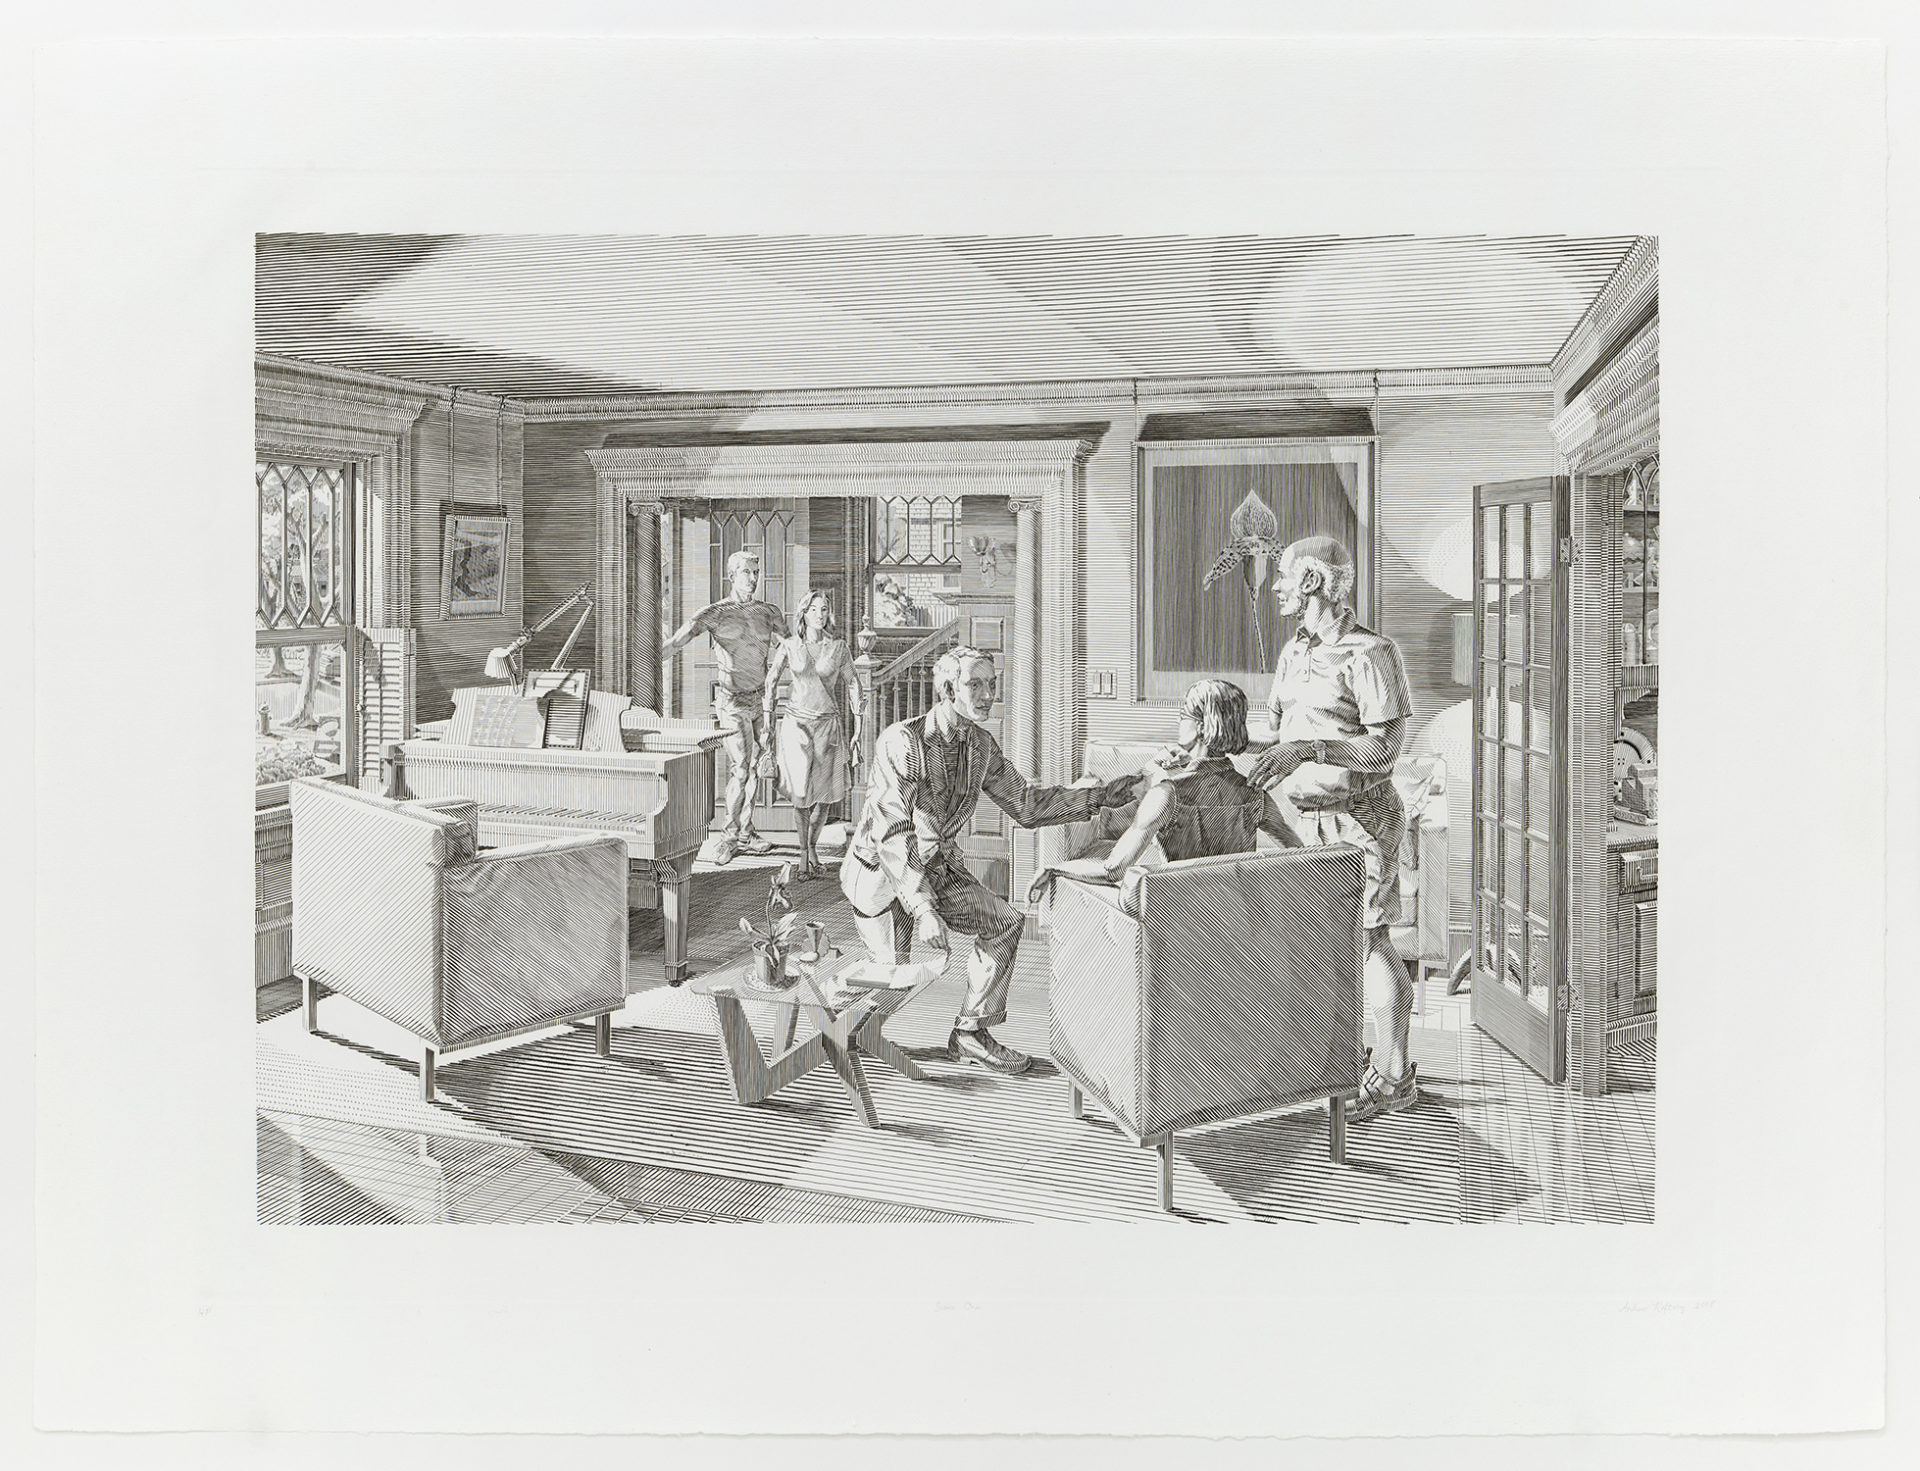 Open House: Five Engraved Scenes - Scene One - Living Room, 2008, Copperplate engraving, 22 x 30 inches (55.9 x 76.2 cm), Edition of 50